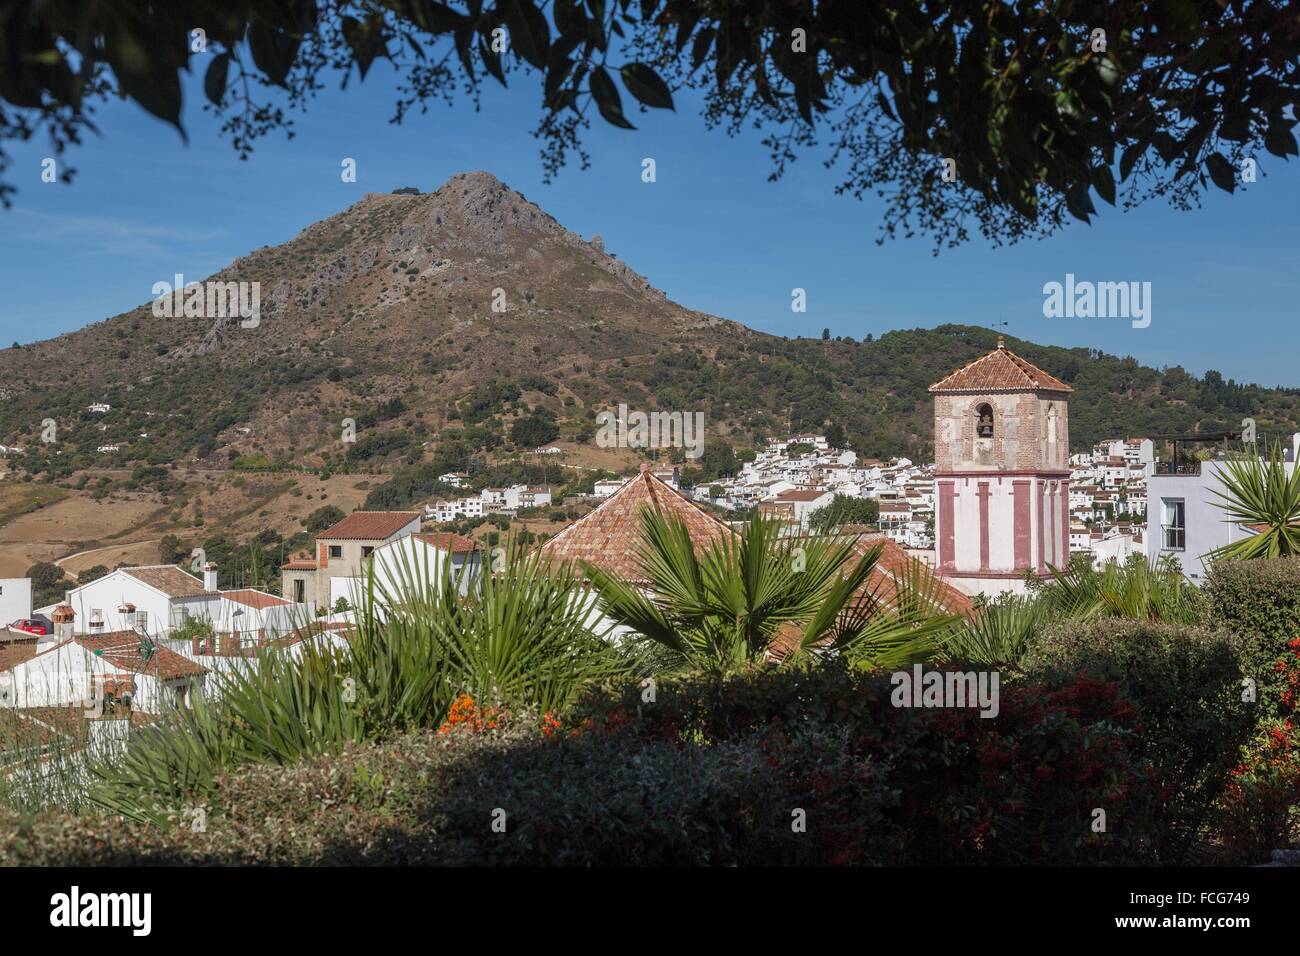 ILLUSTRATION OF ANDALUSIA, COSTA DEL SOL, SOUTHERN SPAIN, EUROPE Stock Photo